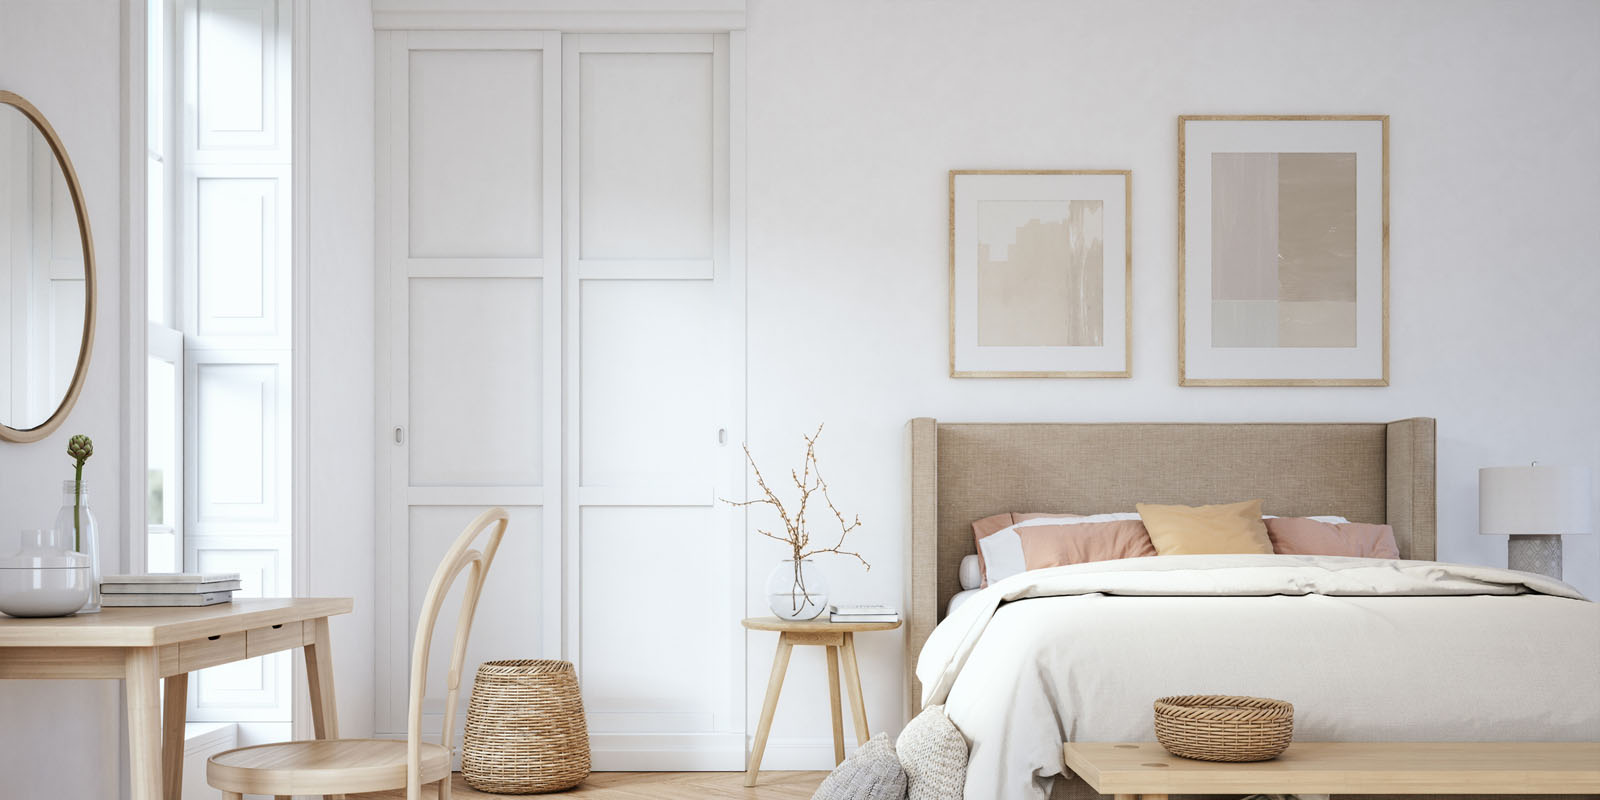 A bedrom filled with color white, cream, and brown.